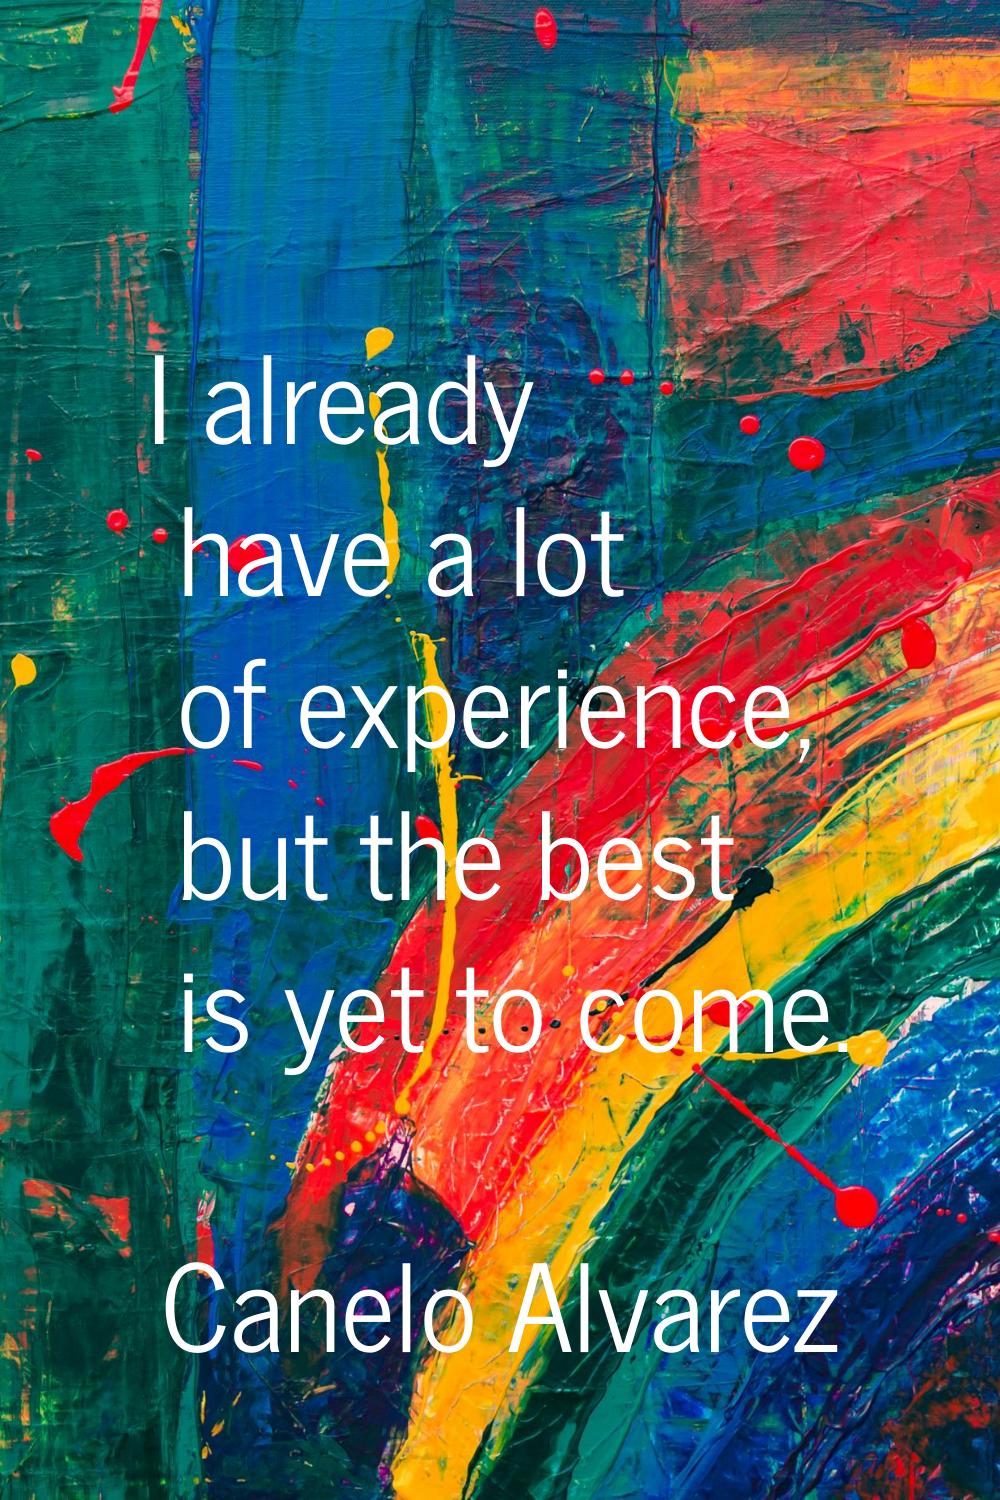 I already have a lot of experience, but the best is yet to come.